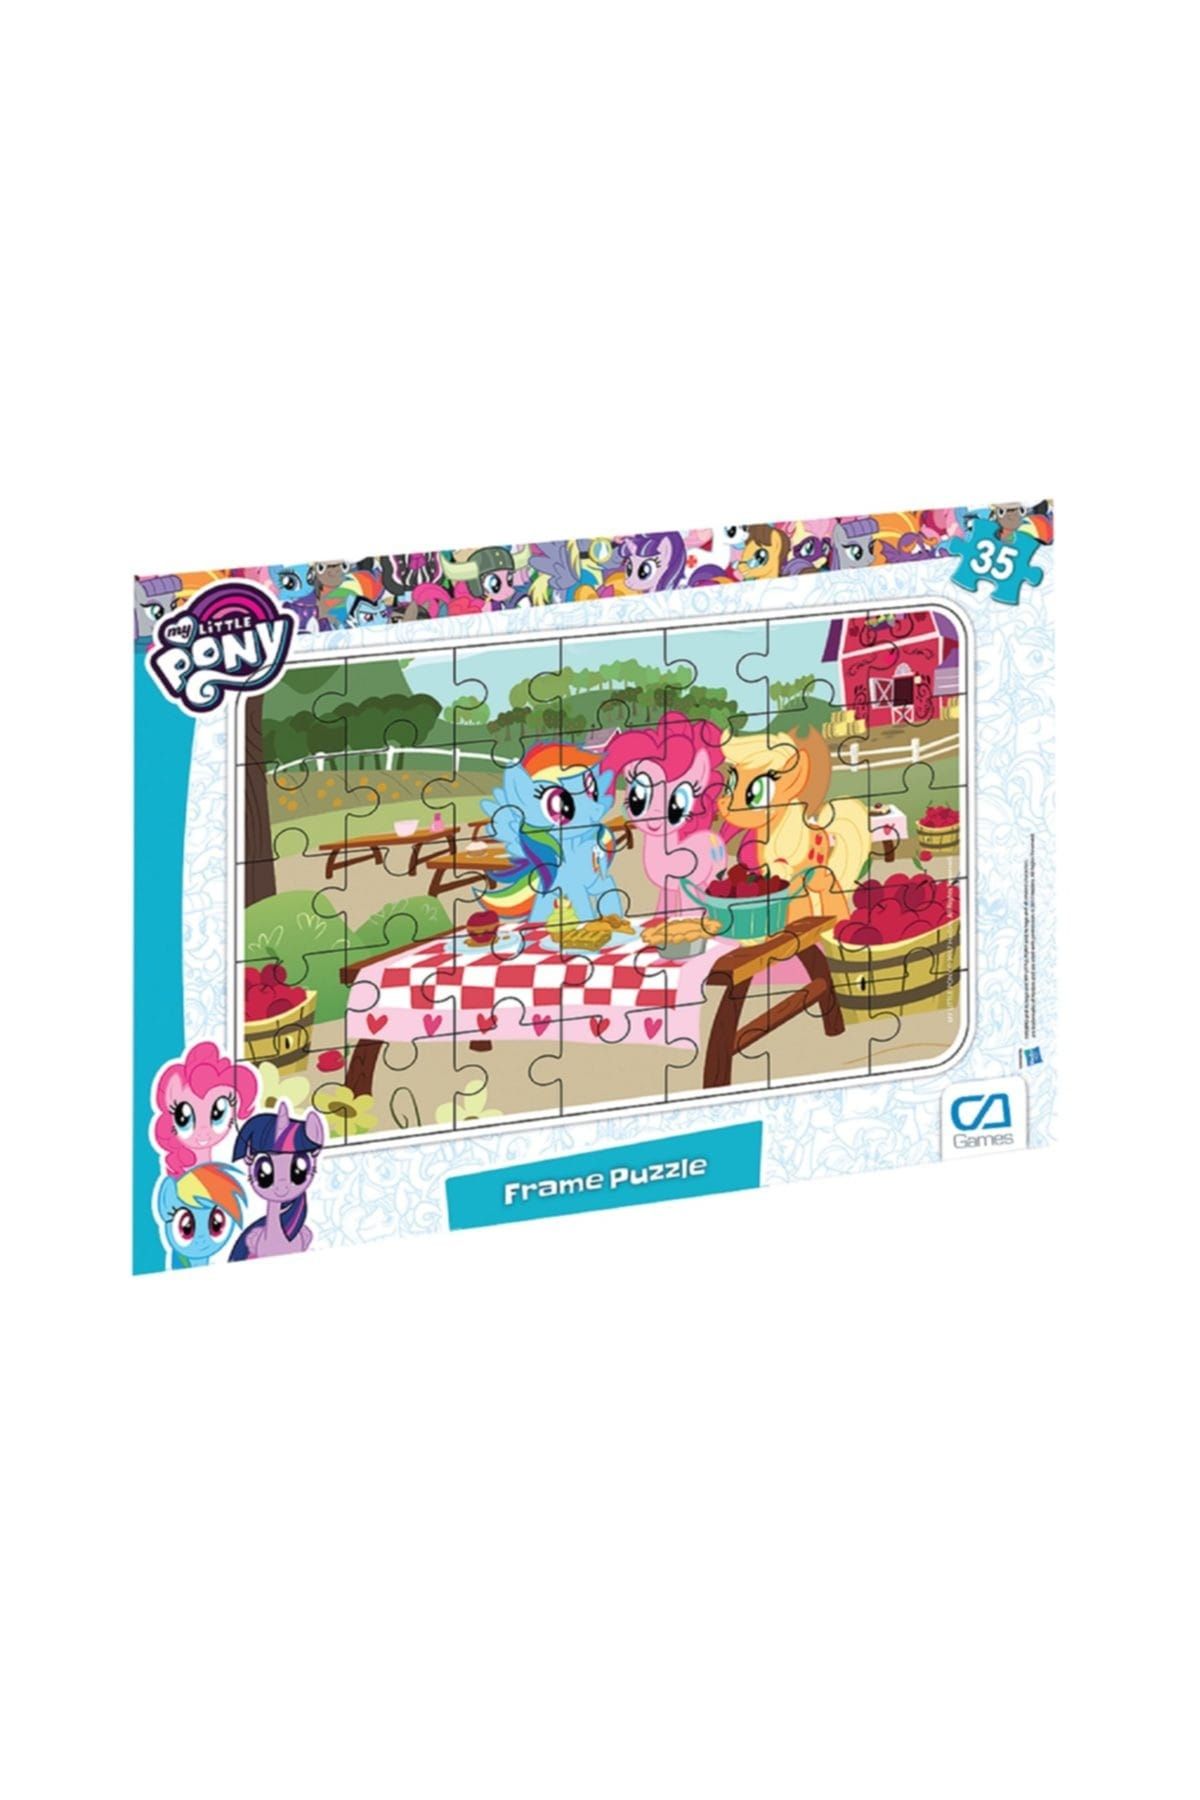 CA Games My Lıttle Pony Frame Puzzle 35 - 2 Ca.5014 /